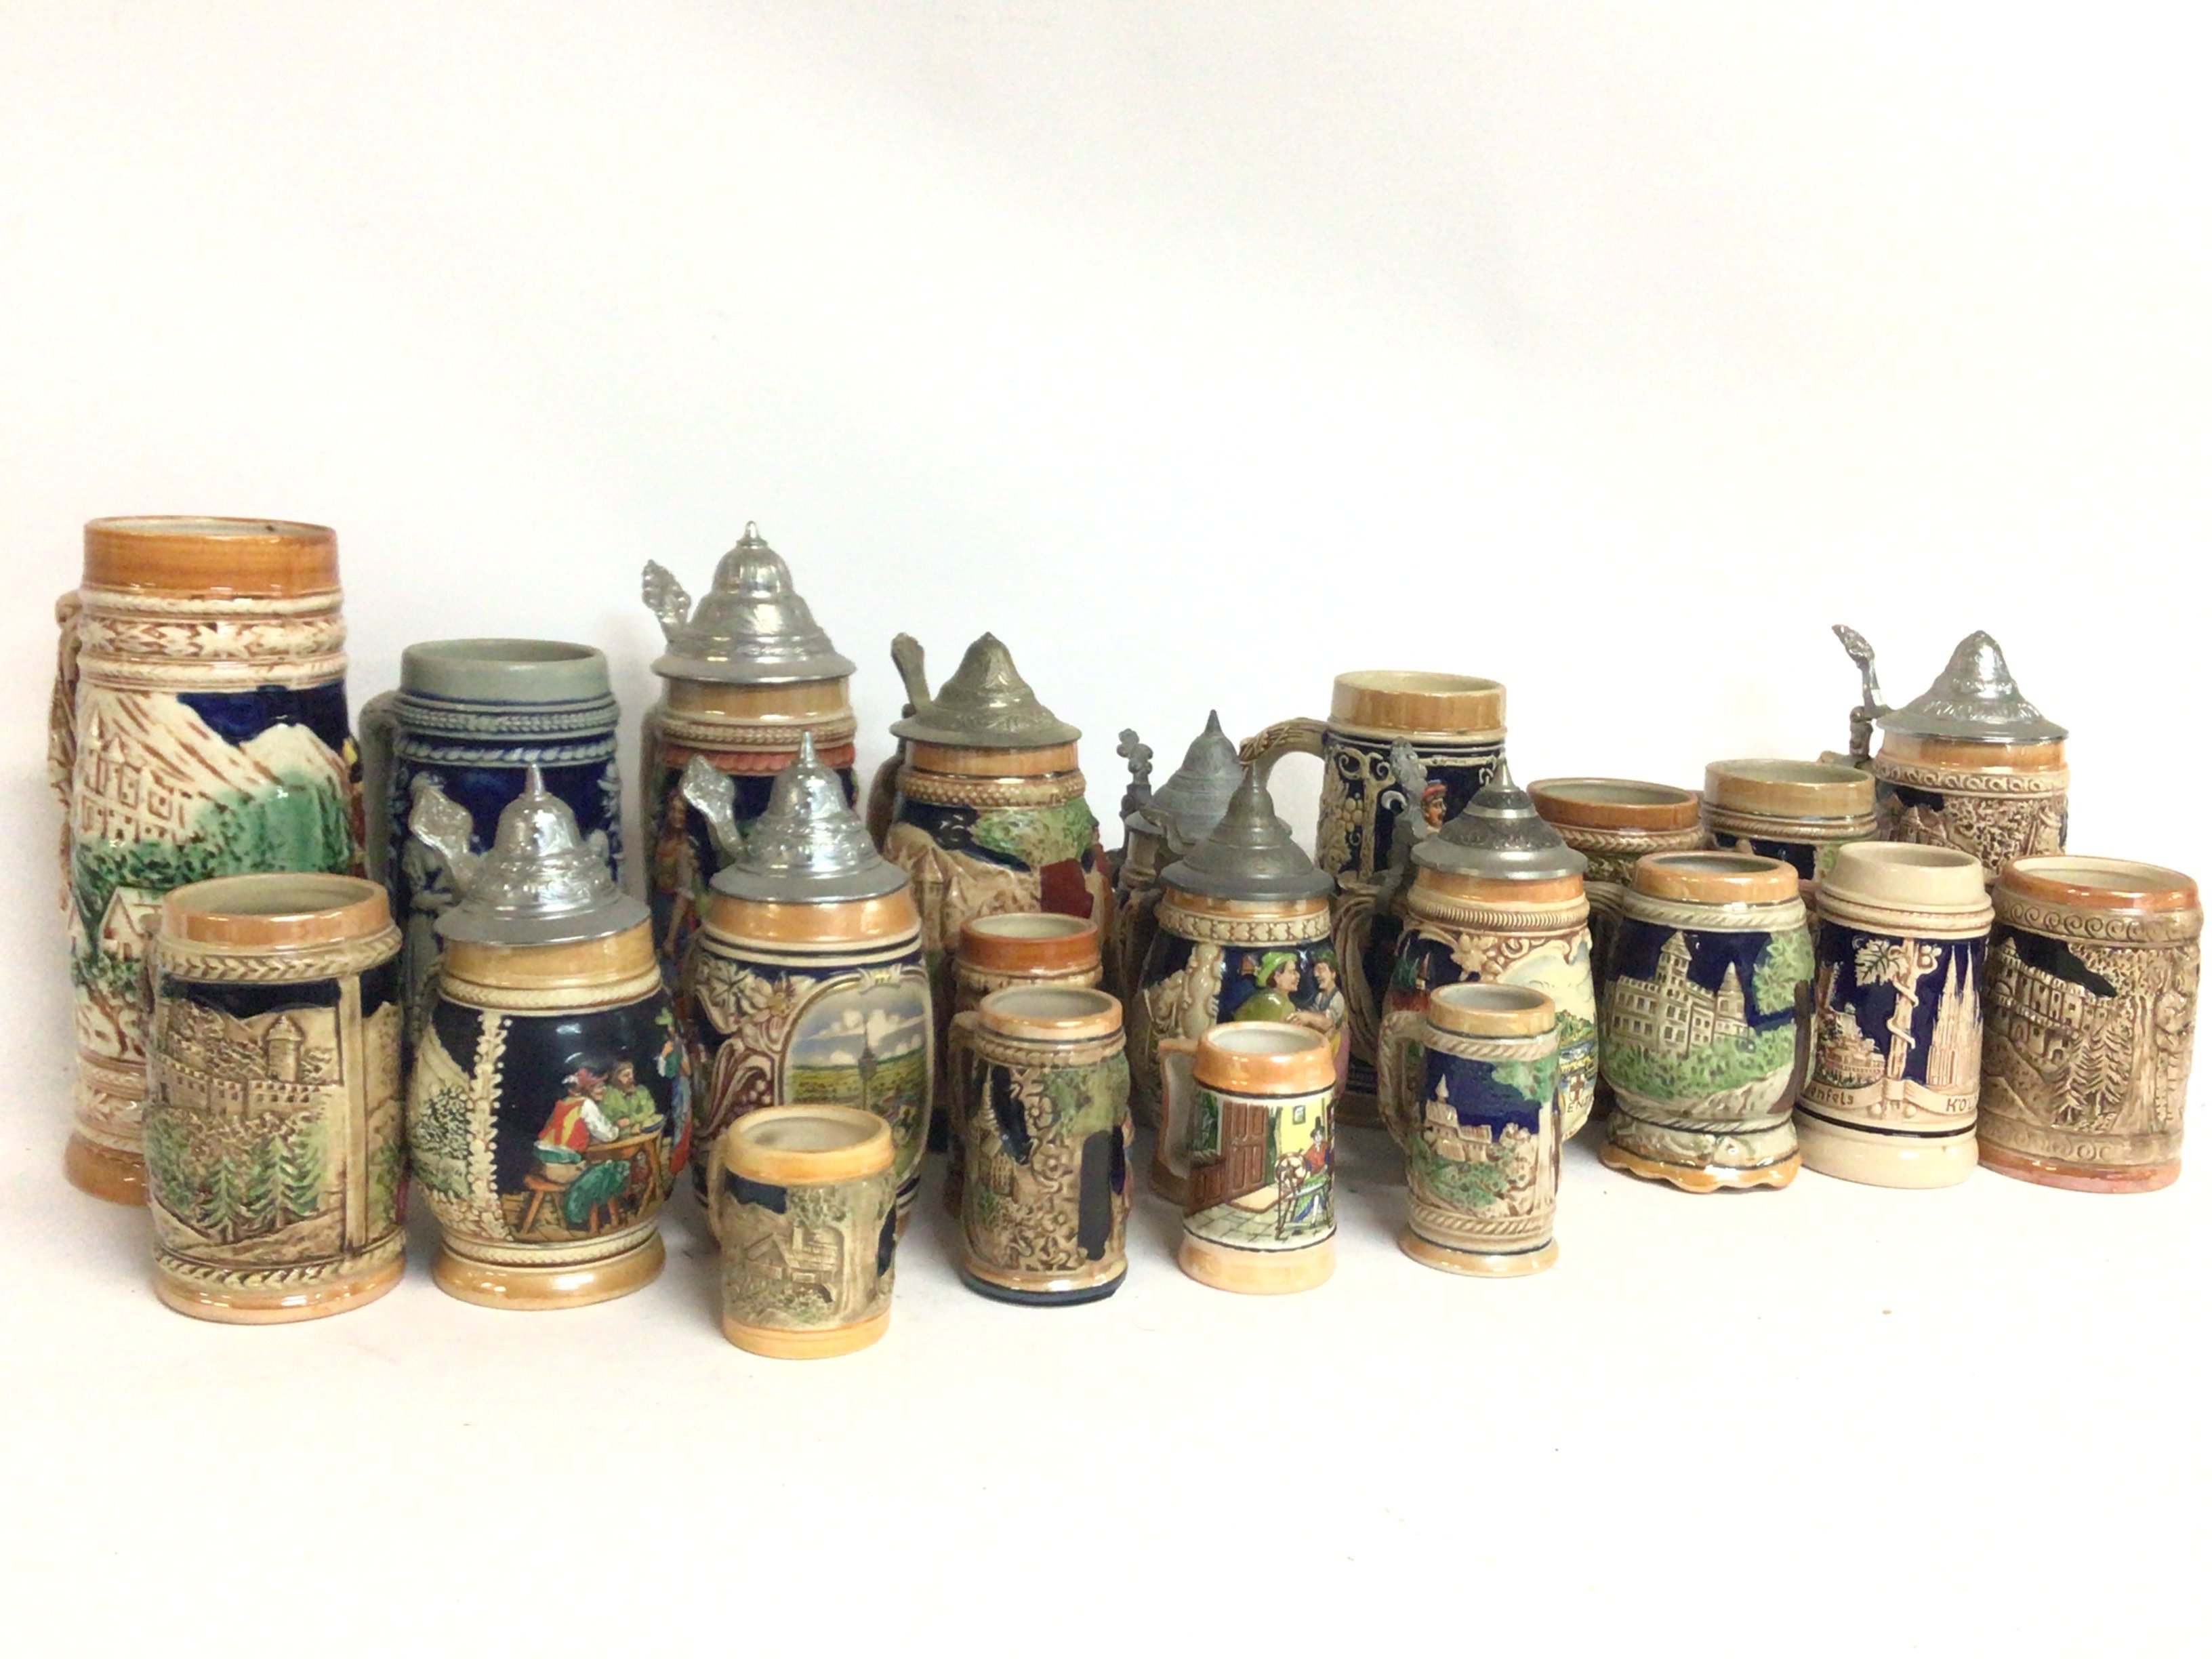 A large collection of German Stein jugs and tankar